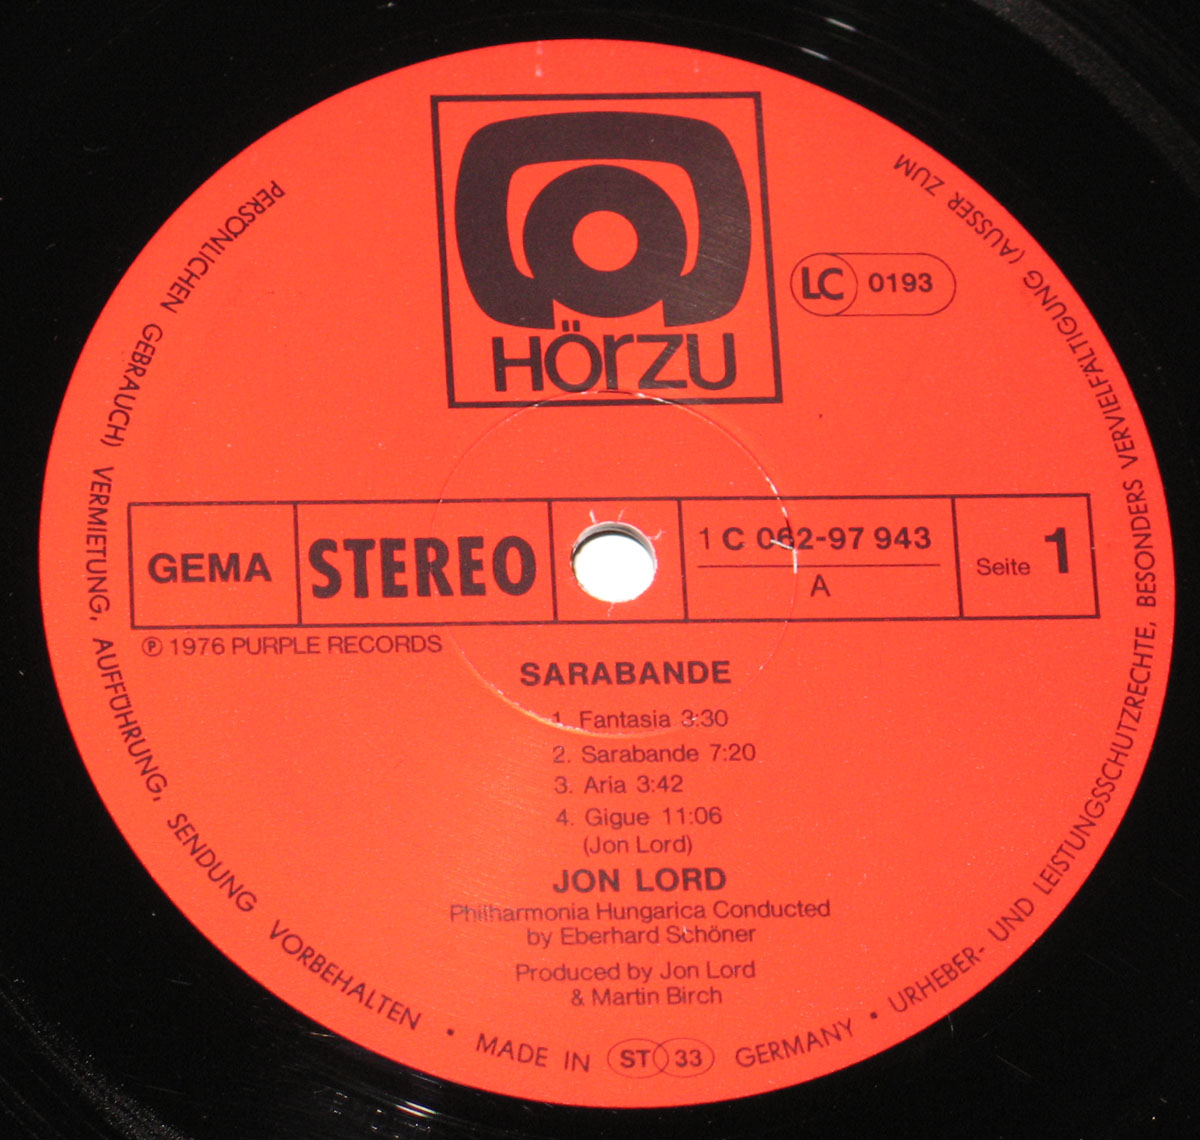 Close up of Side One record's label JON LORD - Sarabande - Hörzu Release with die-cut album cover